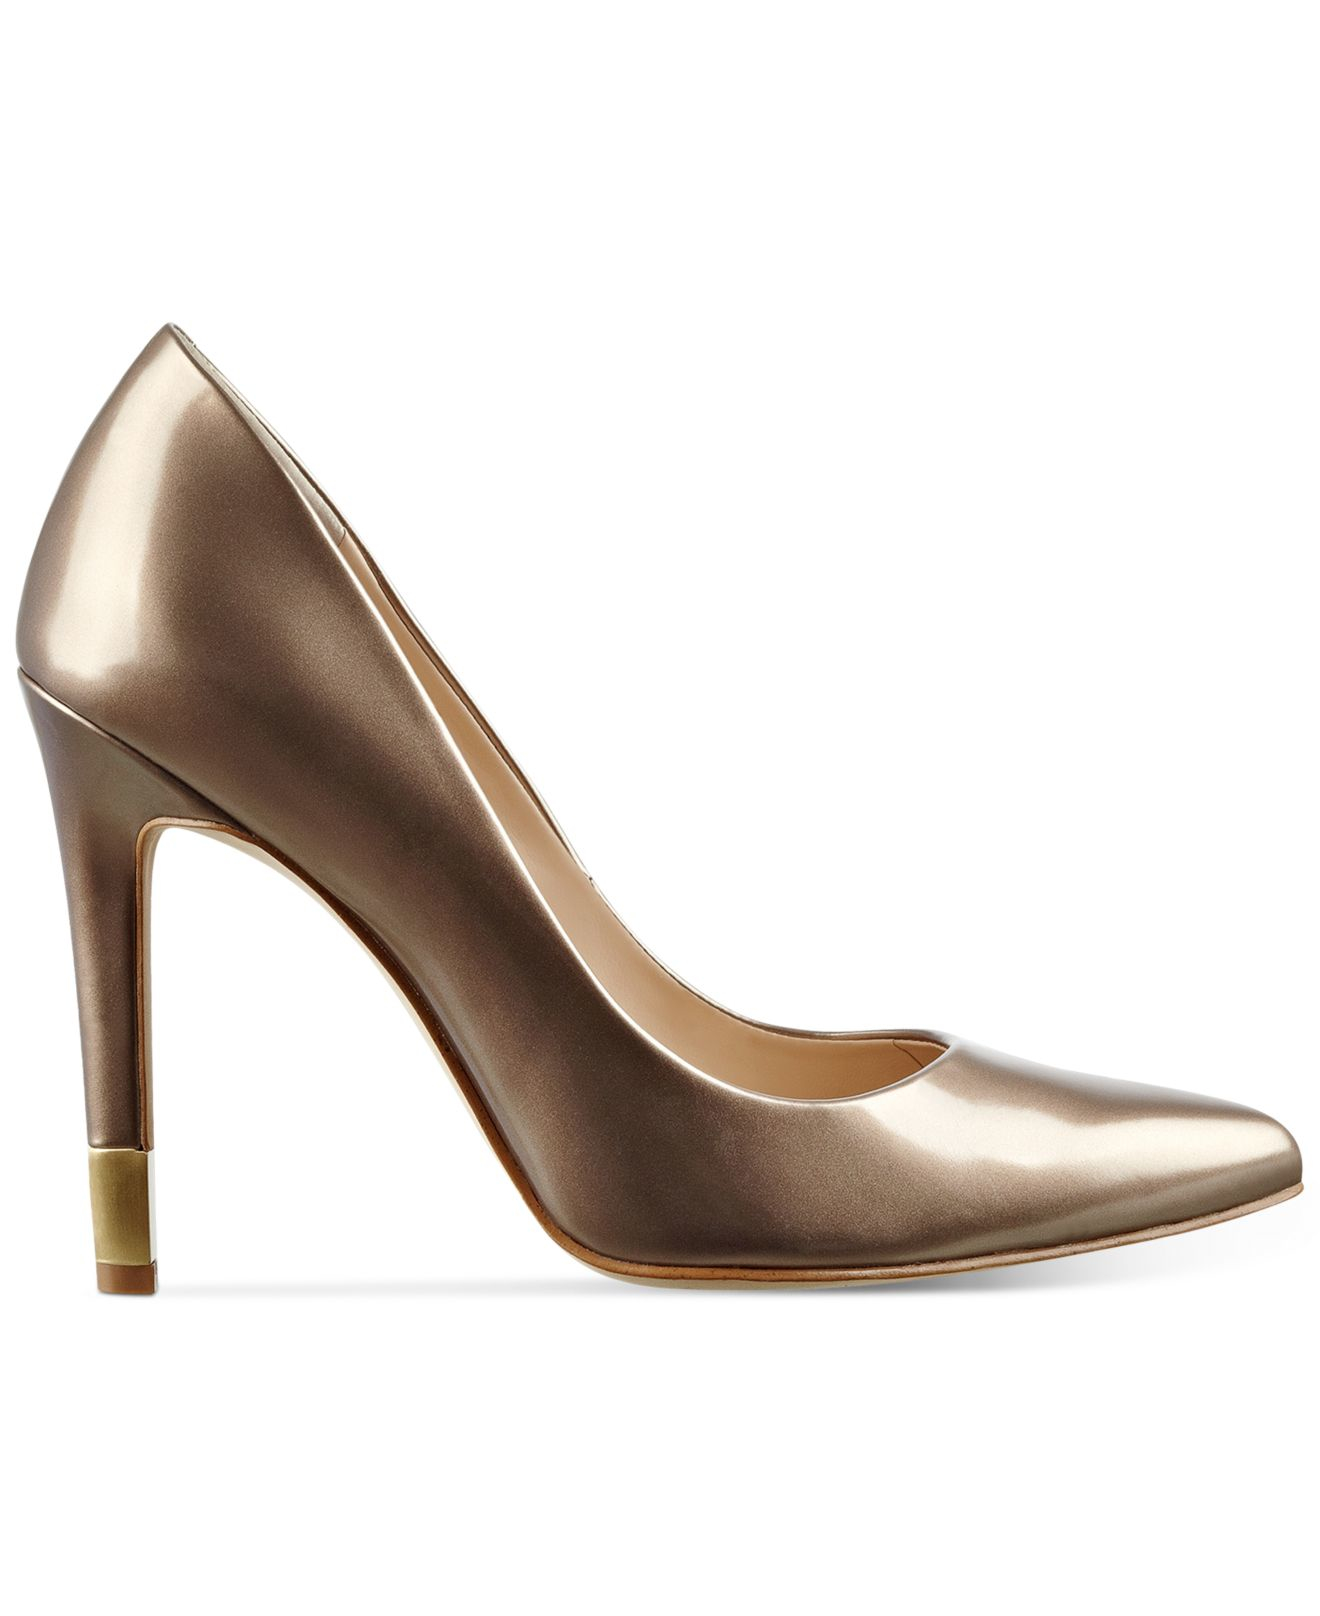 Lyst - Guess Babbitta Pointed-toe Pumps in Metallic